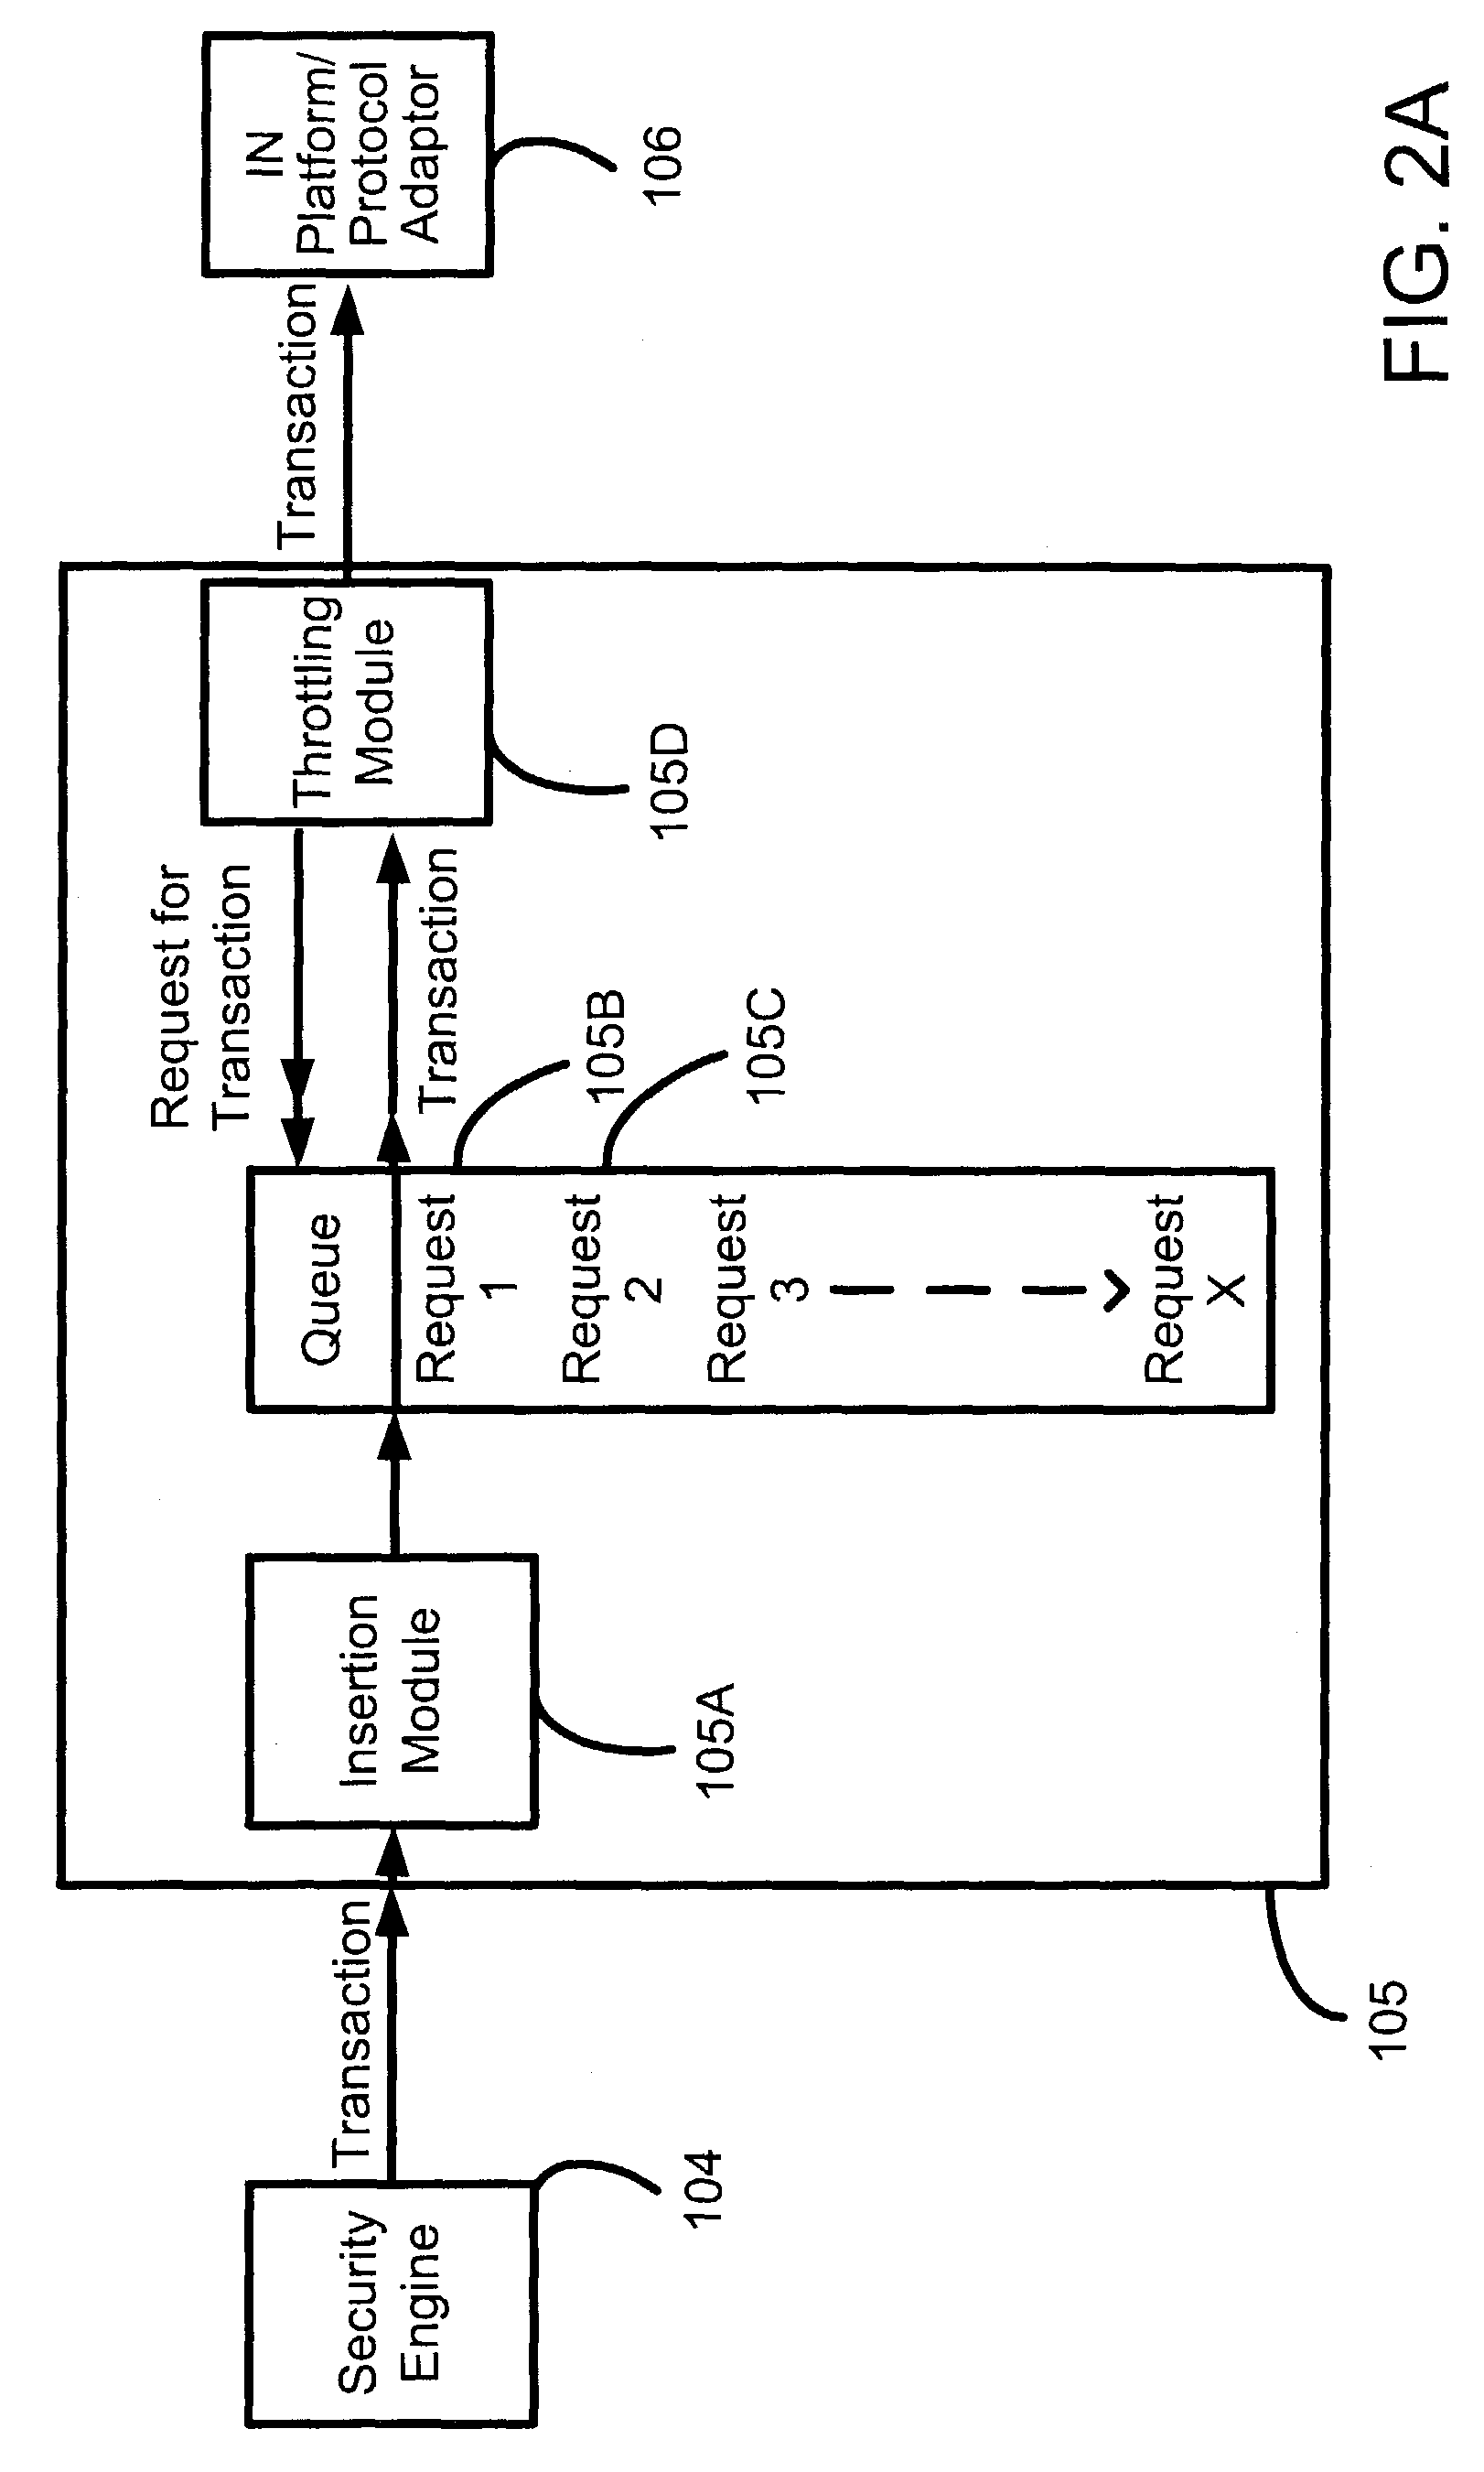 Method for implementing an Open Charging (OC) middleware platform and gateway system